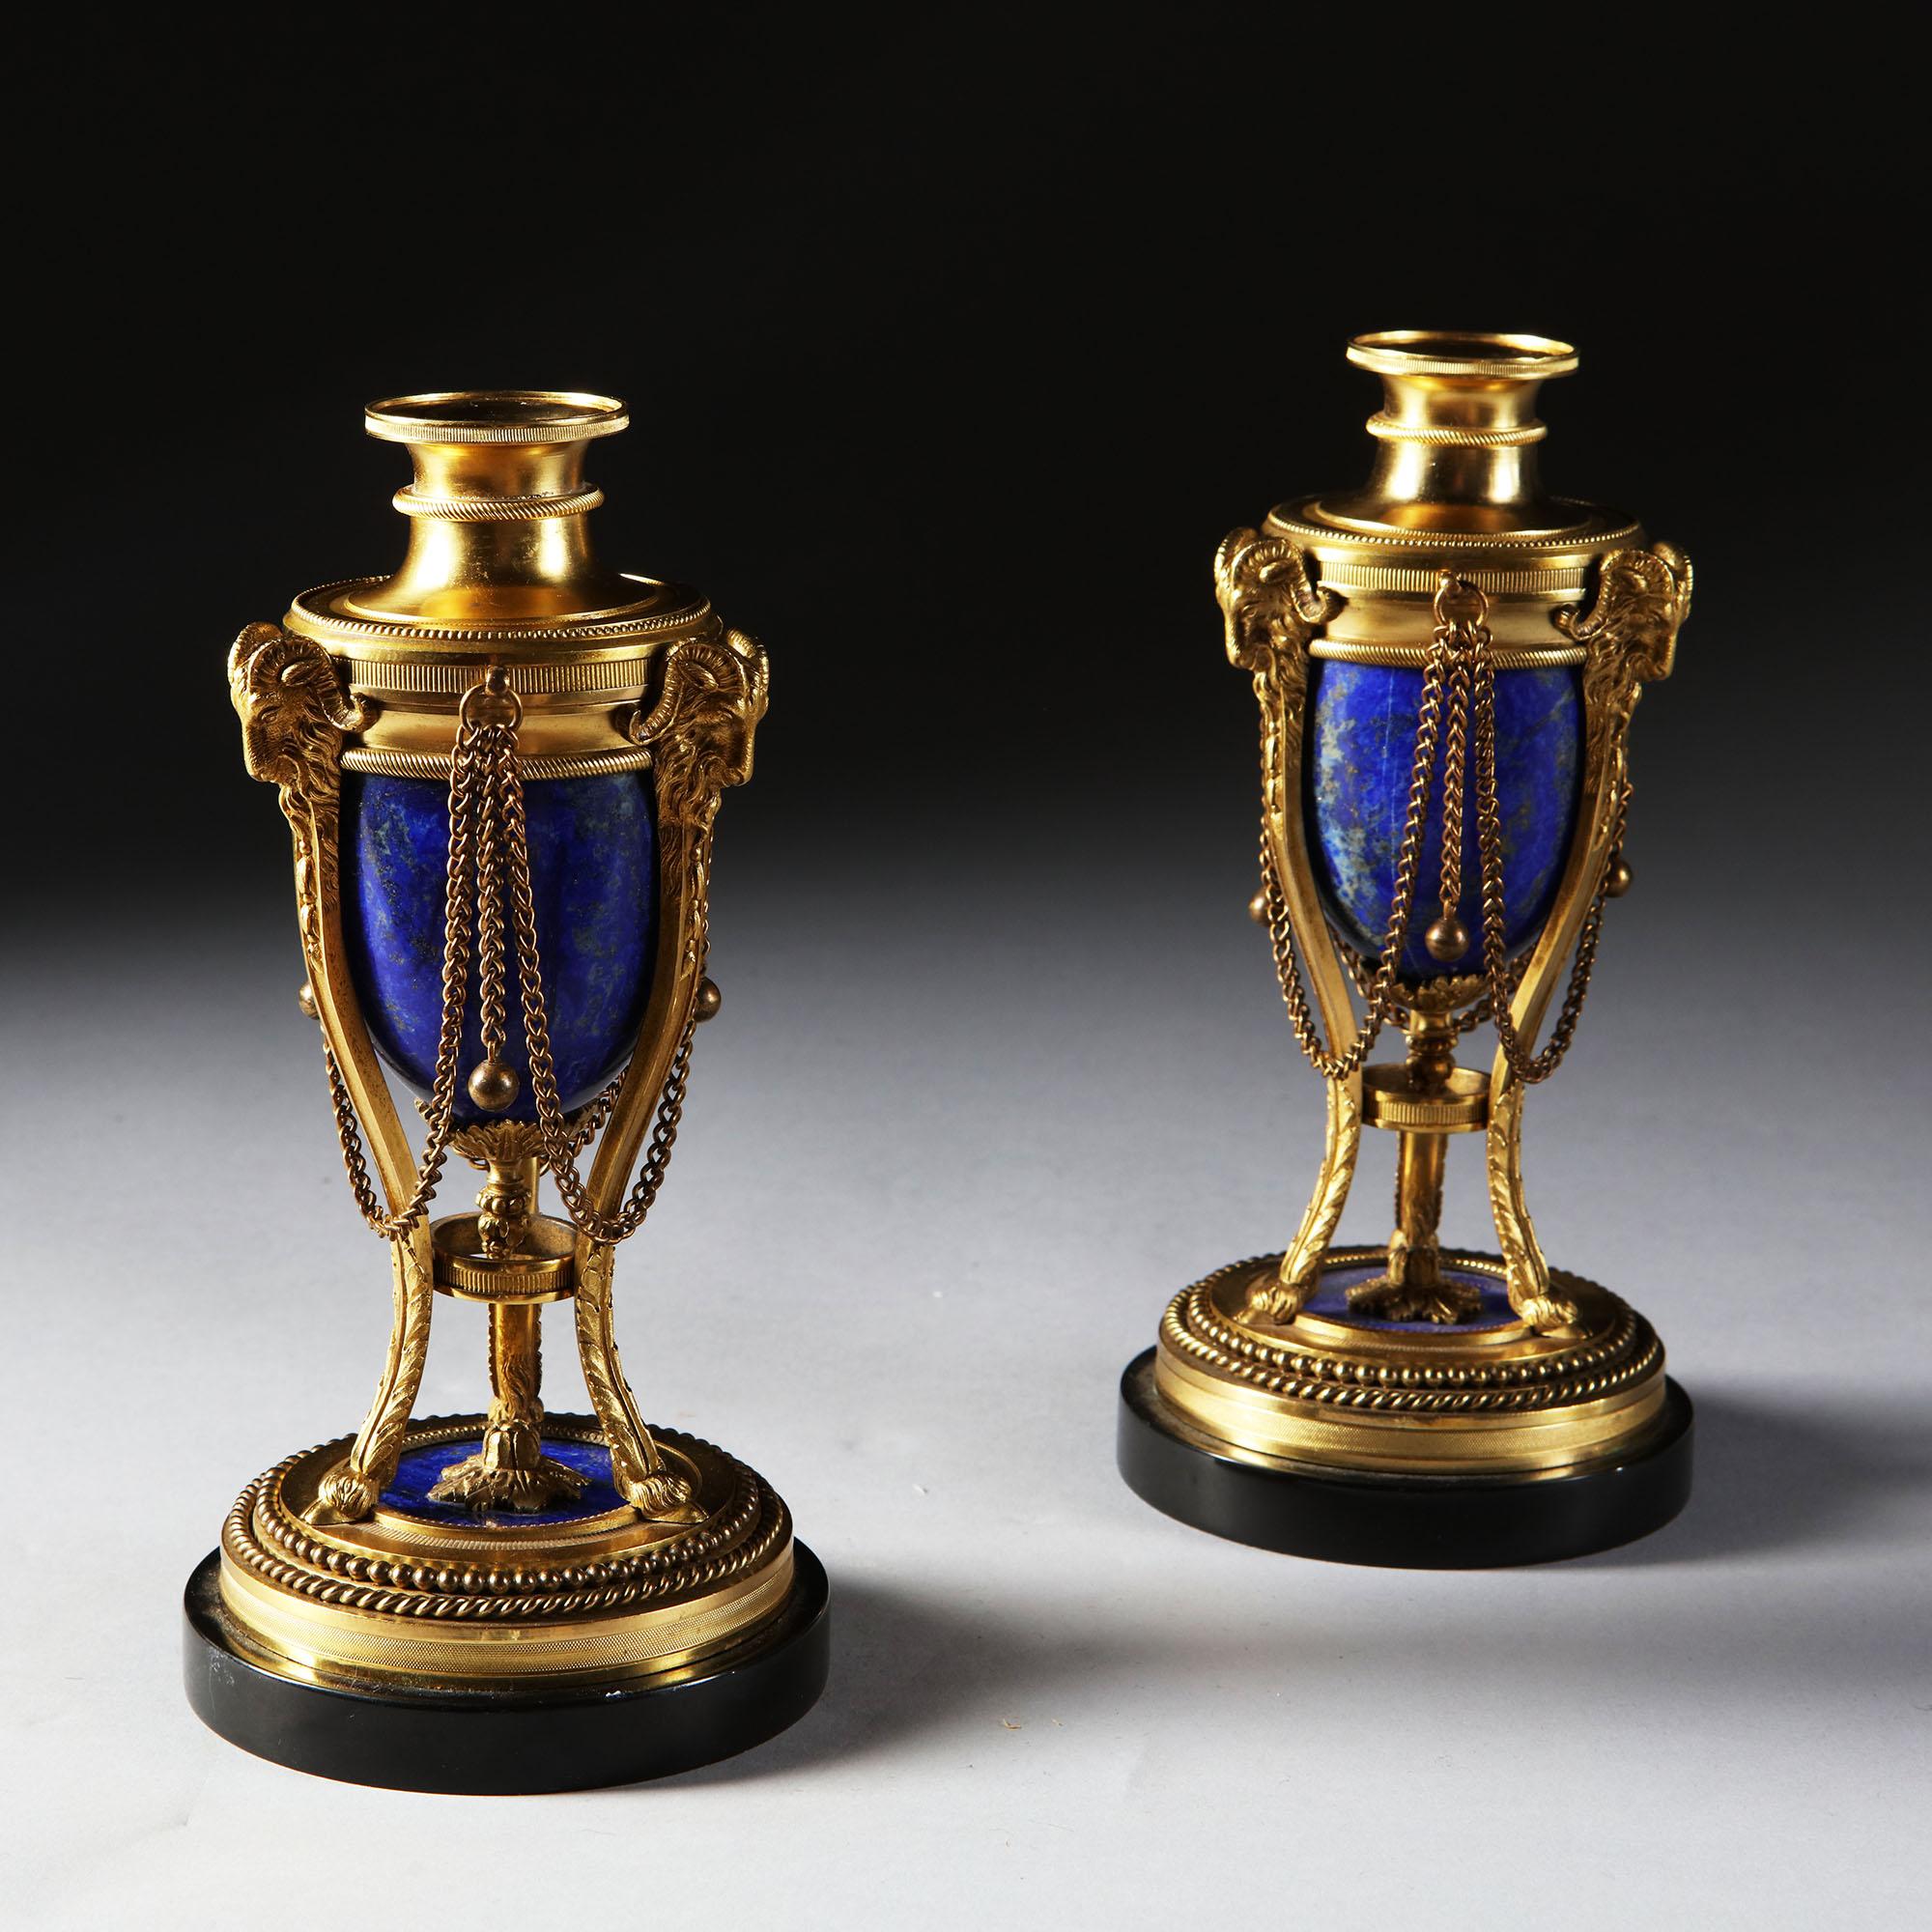 Pair of French Napoleon III Blue Lapis Lazuli and Gold Ormolu Cassolettes In Excellent Condition In London, by appointment only